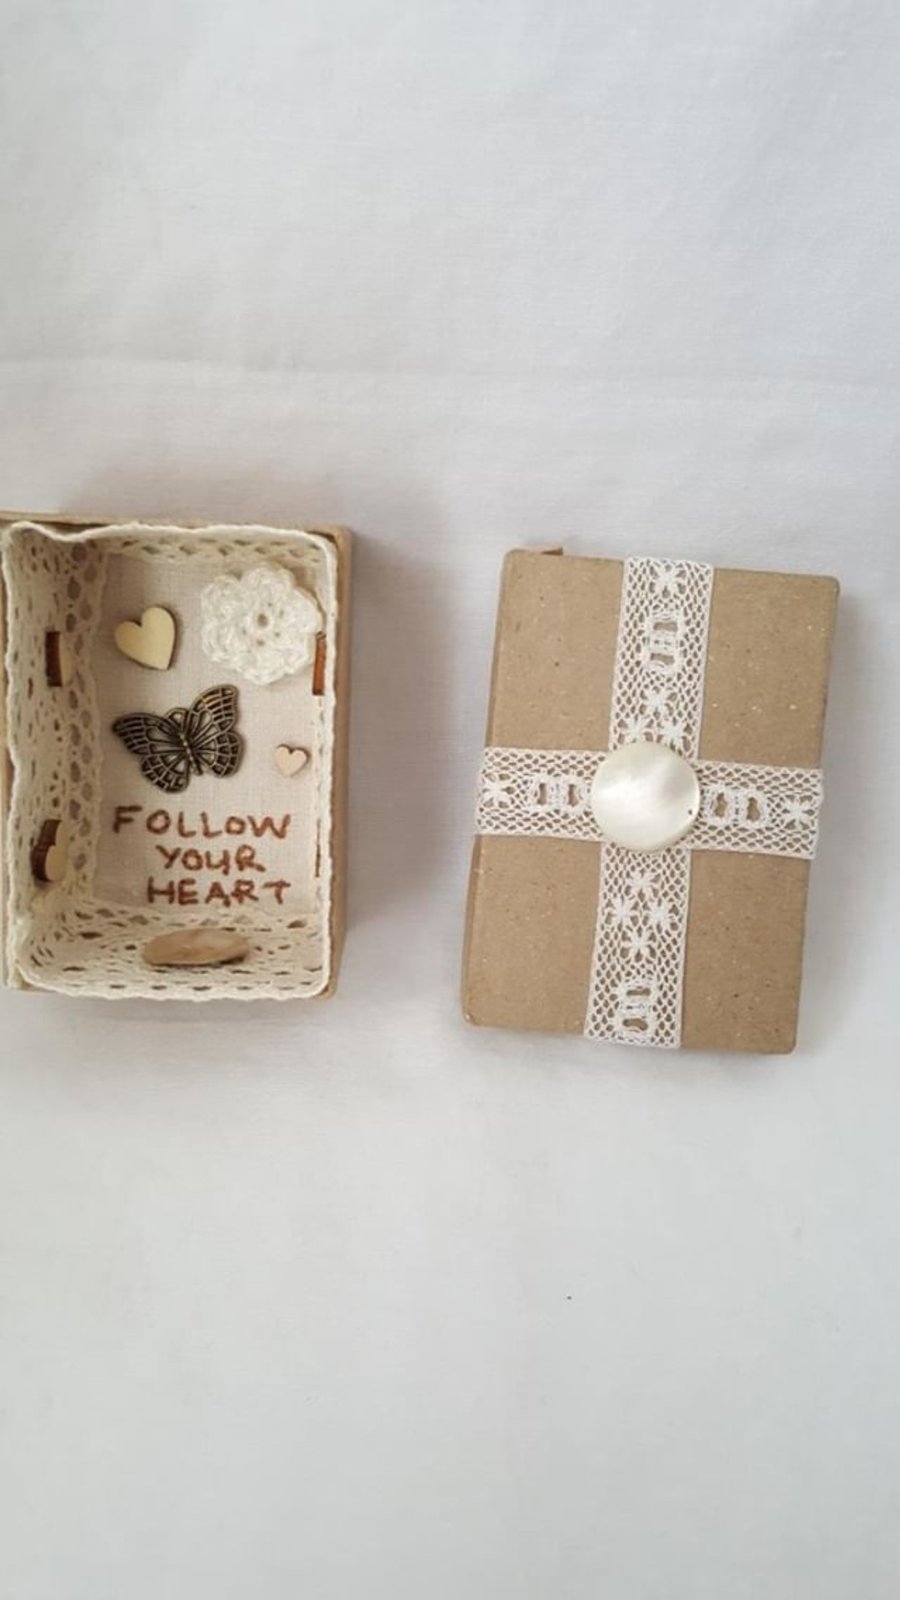 small miniature art diorama with a message to 'follow your heart'